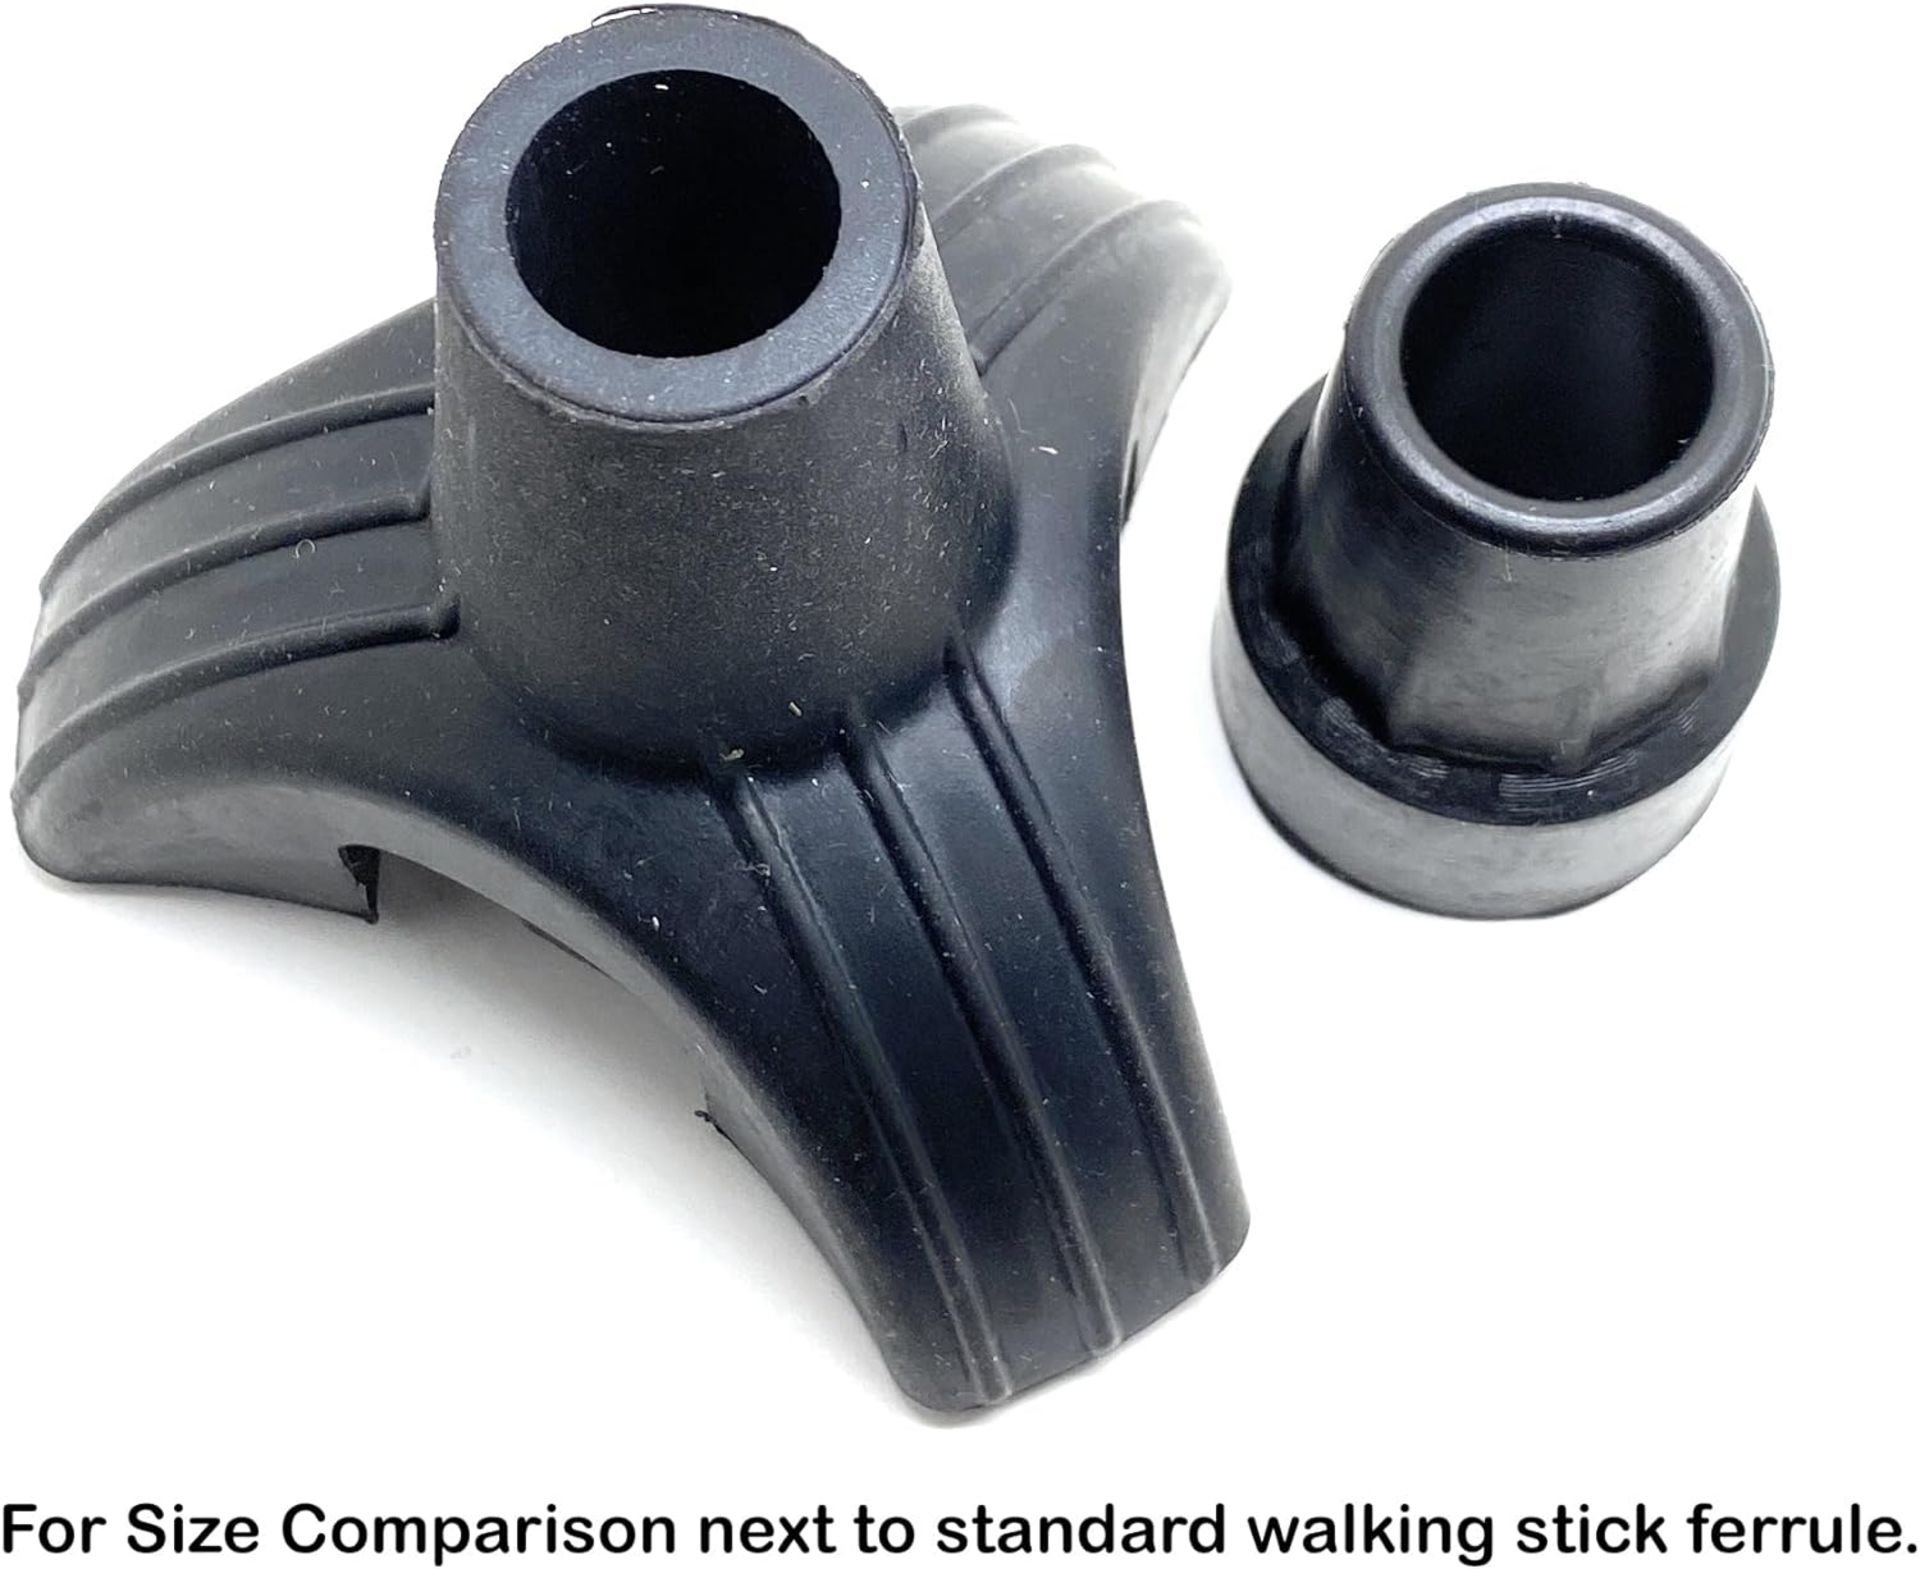 3,370 X NEW WALKING STICK STABILITY TIP - BLACK - Image 2 of 3